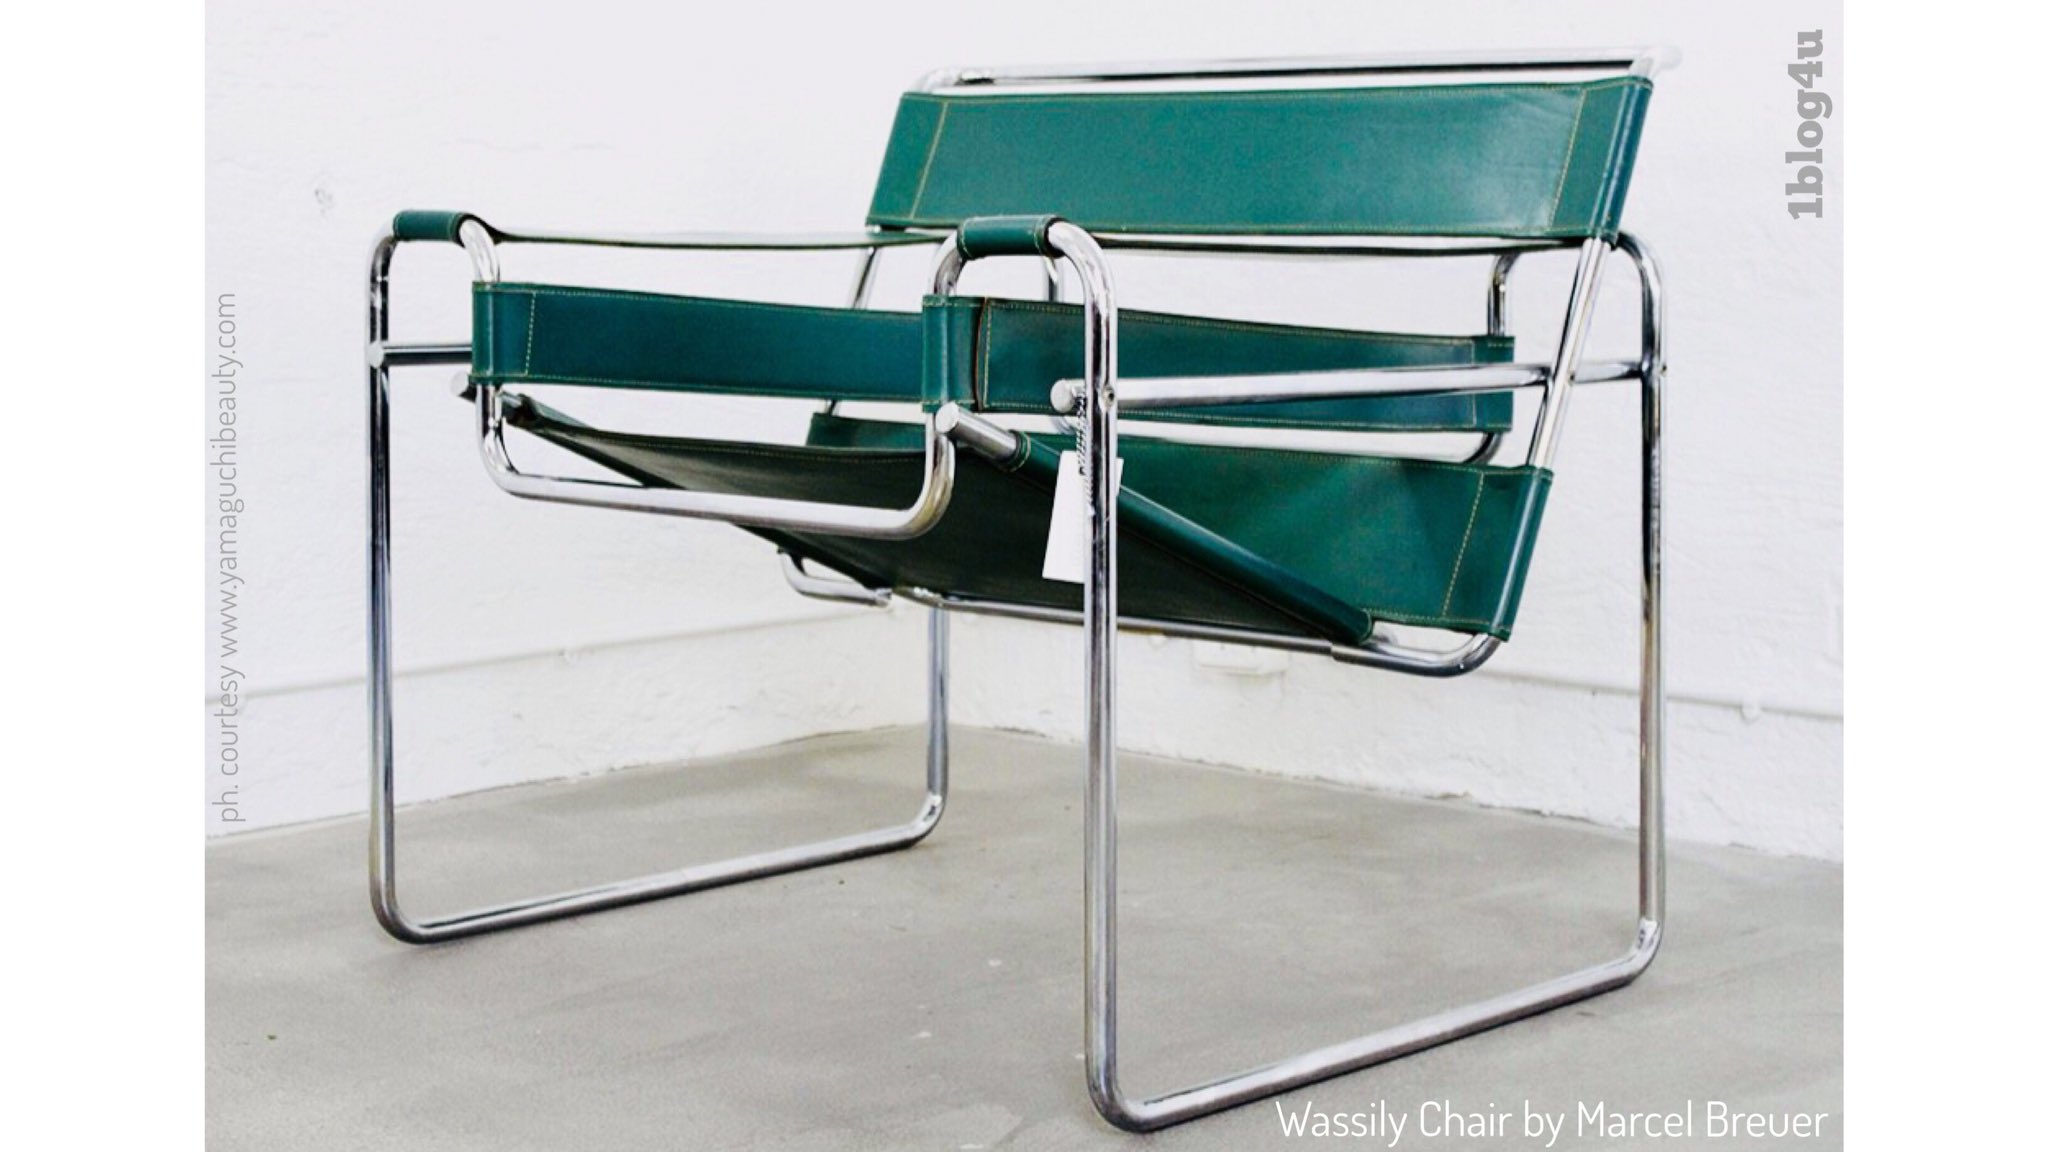 1blog4u Pa Twitter Green Wassily Chair By Marcel Breuer Ph Courtesy Https T Co Xvqemrkzxp Wassilychair Designed By Marcelbreuer In The 1920s Produced Today By Knoll Vintage Elledecor 1blog4u Gabriellaruggieri Blogger